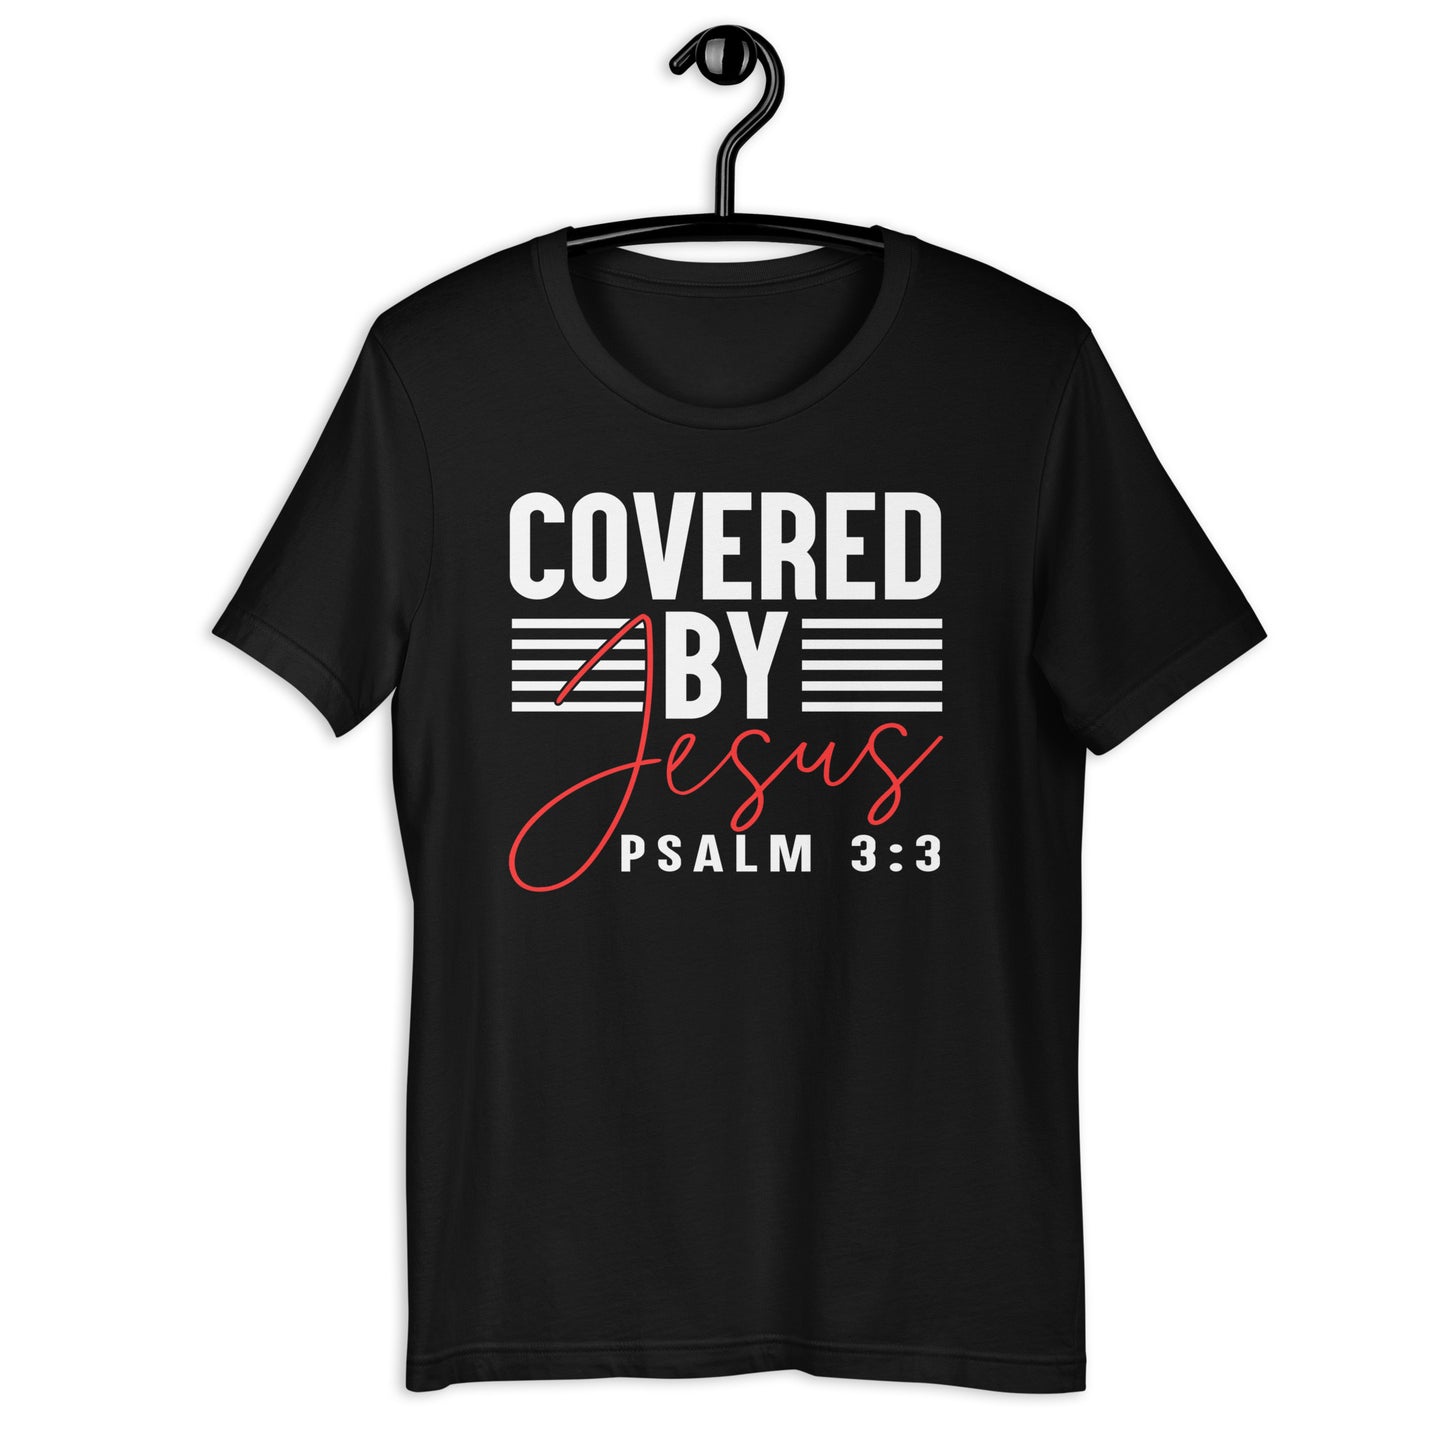 Covered by Jesus T-Shirt